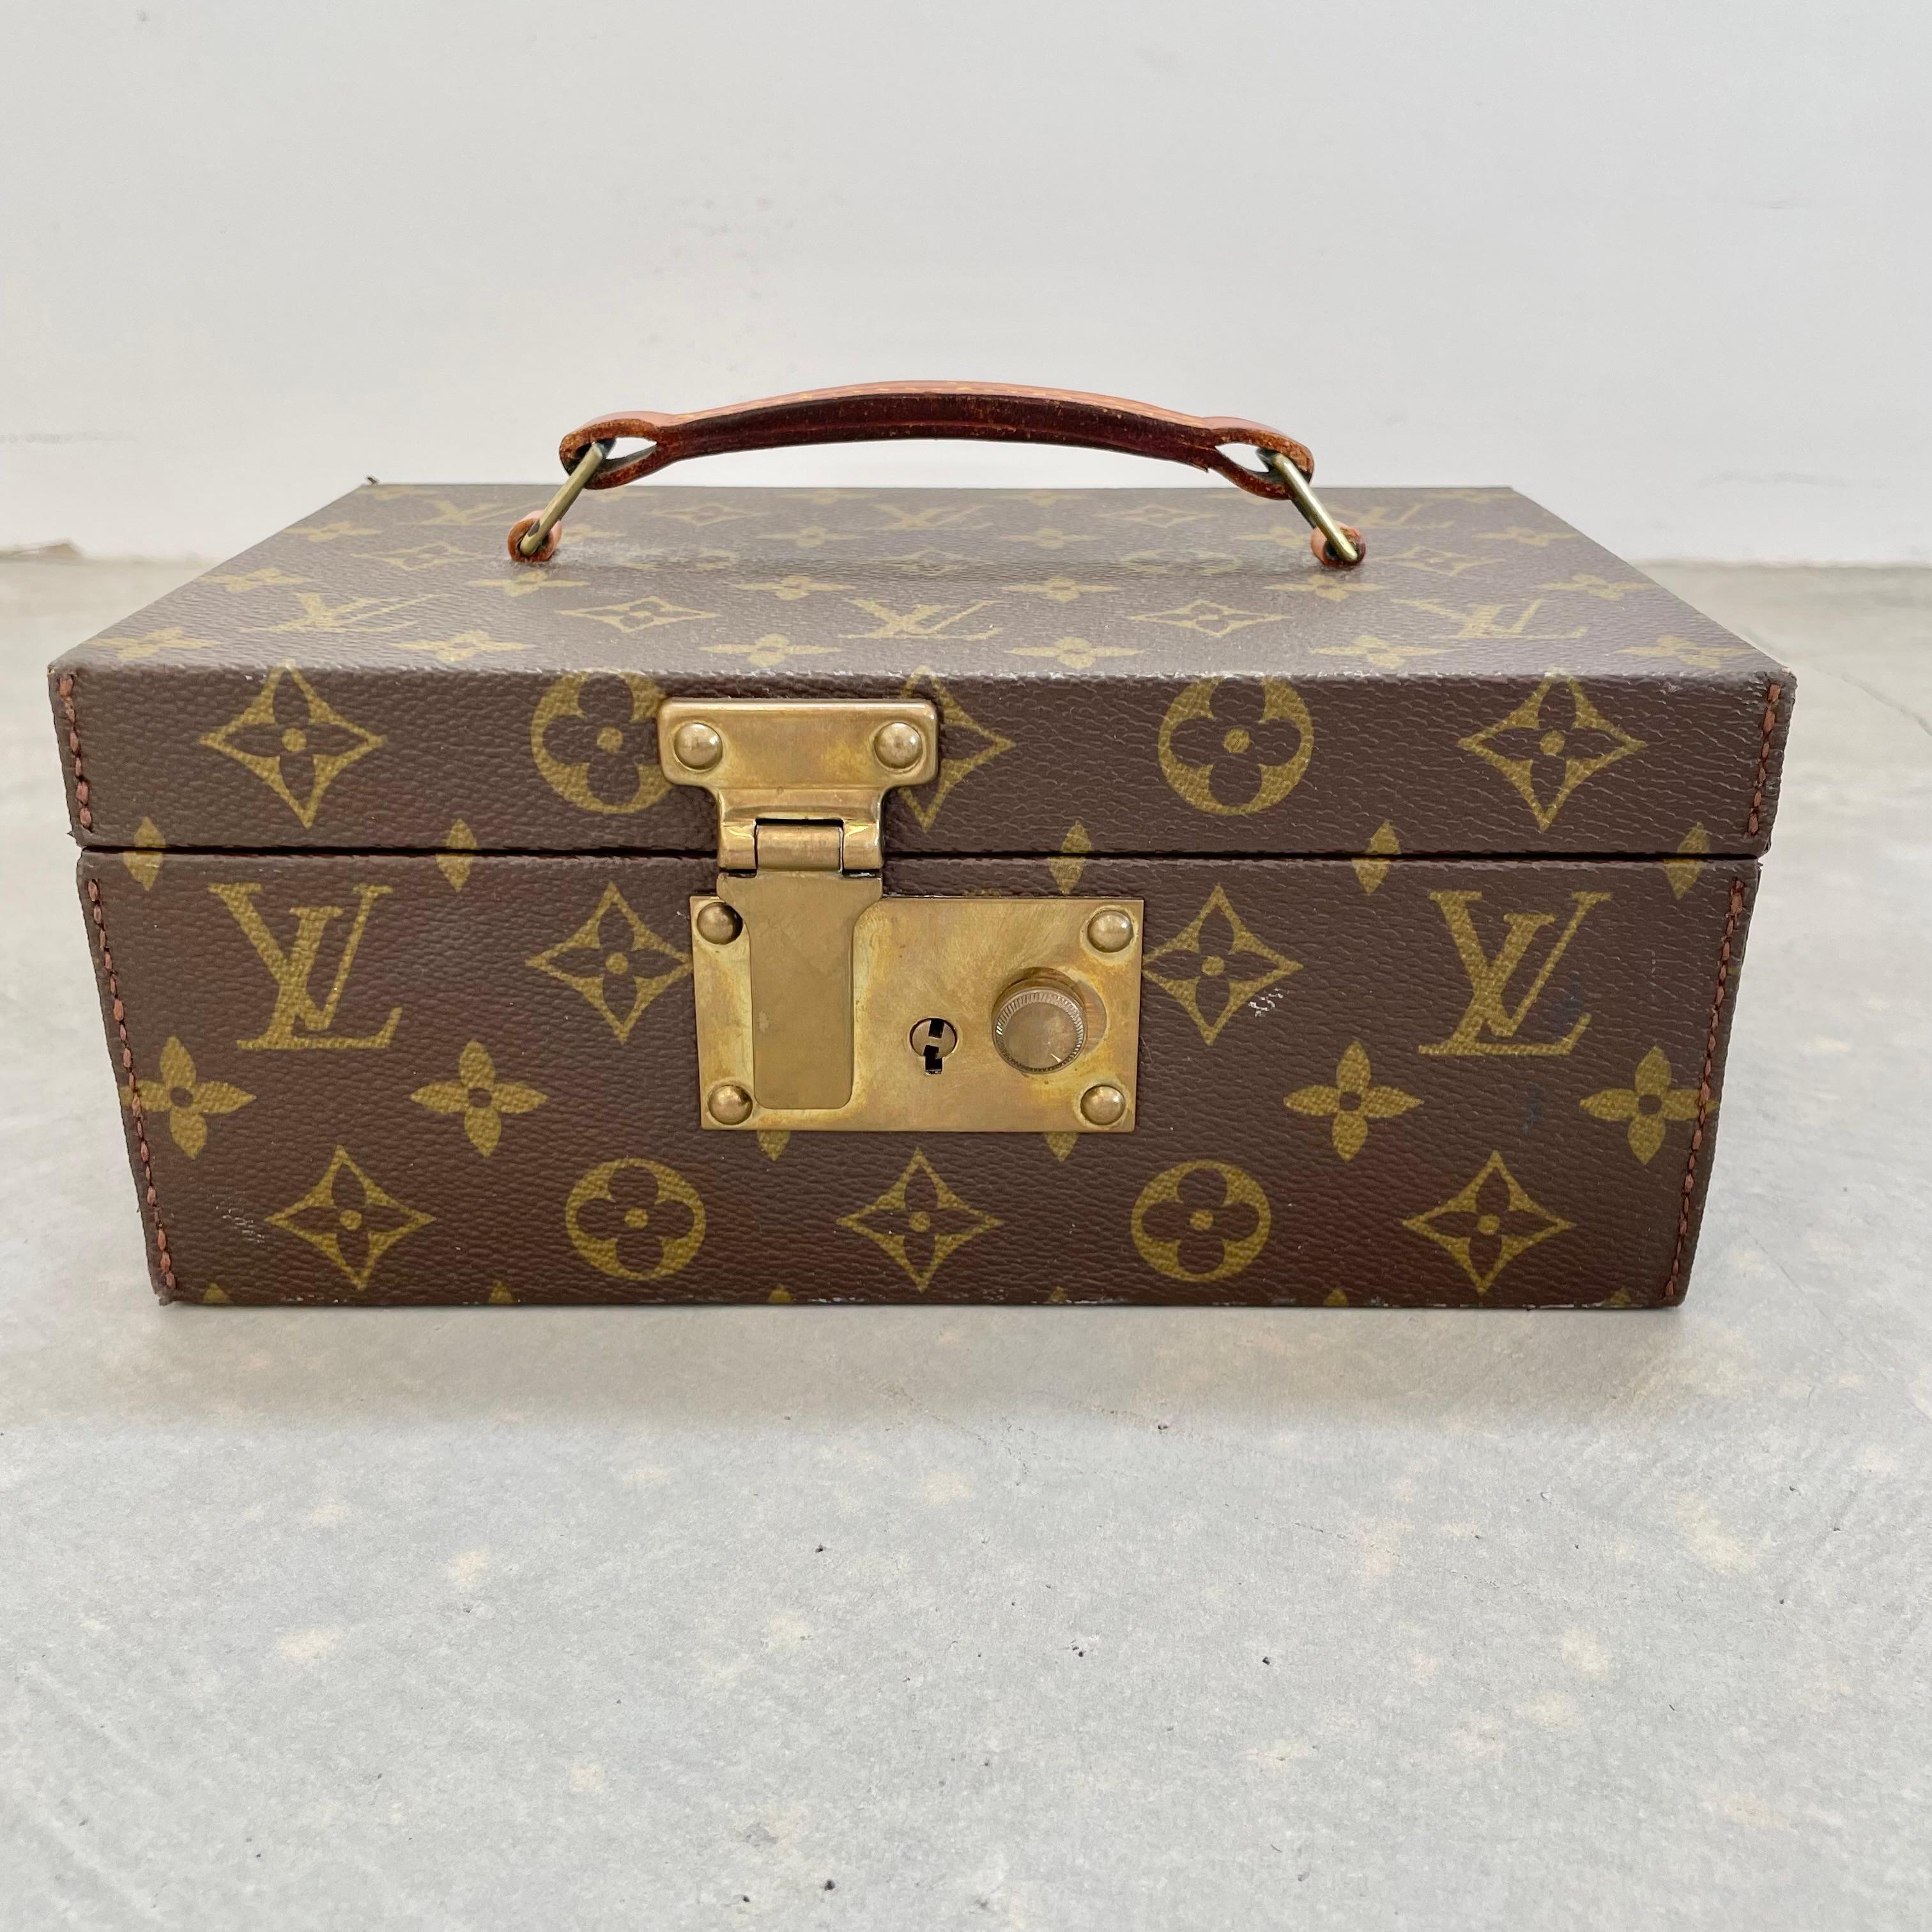 Beautiful Louis Vuitton jewelry box from the 1940s. Perfect for all of your high end jewelry while traveling or as a stationary box at home. Tan interior lining with velvet at the bottom. Includes velvet lined ring holder and jewelry cushion. The